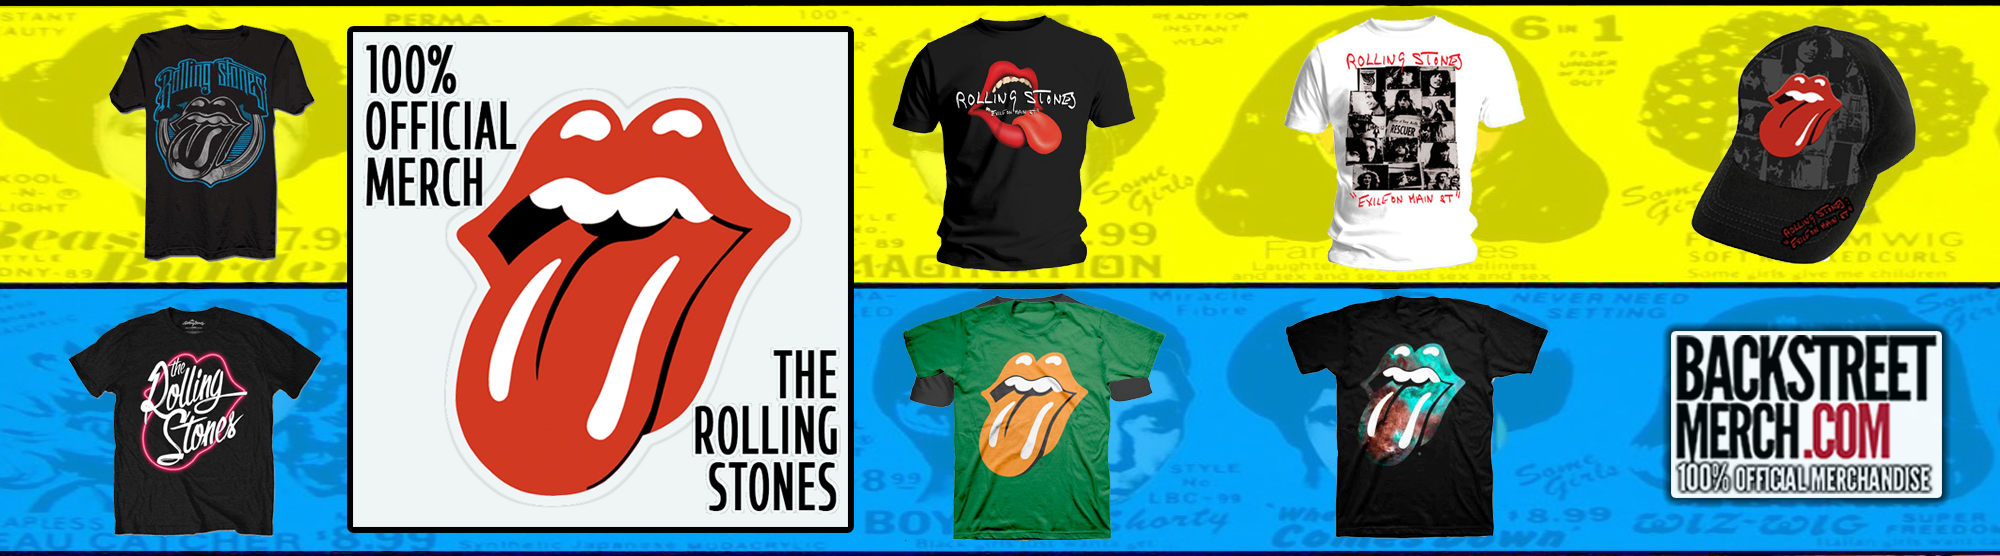 The Rolling Stones Official Merchandise logo